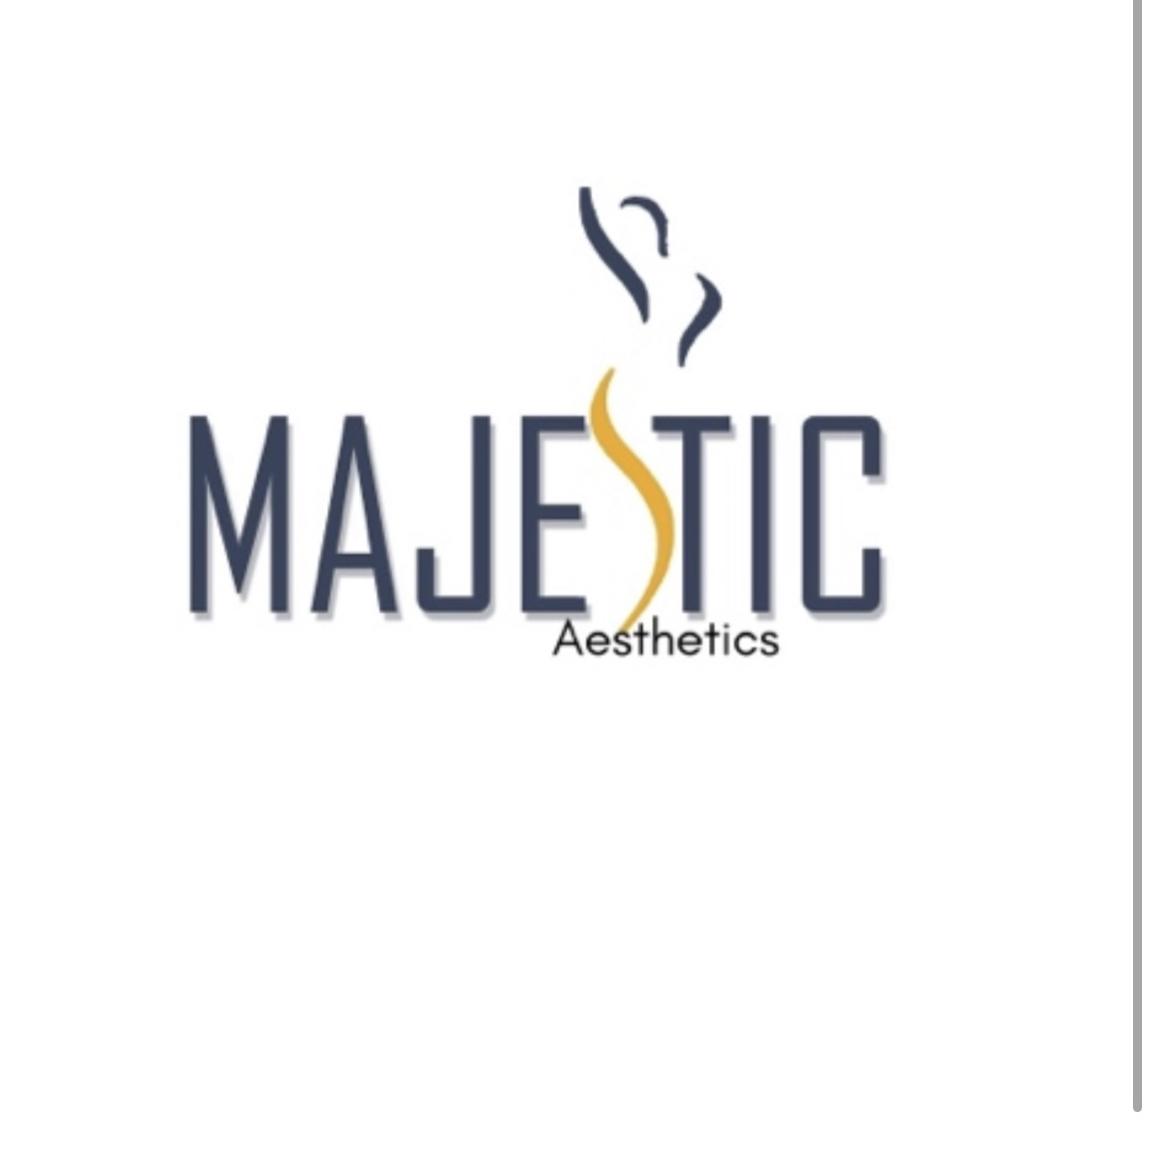 Majestic aesthe's images